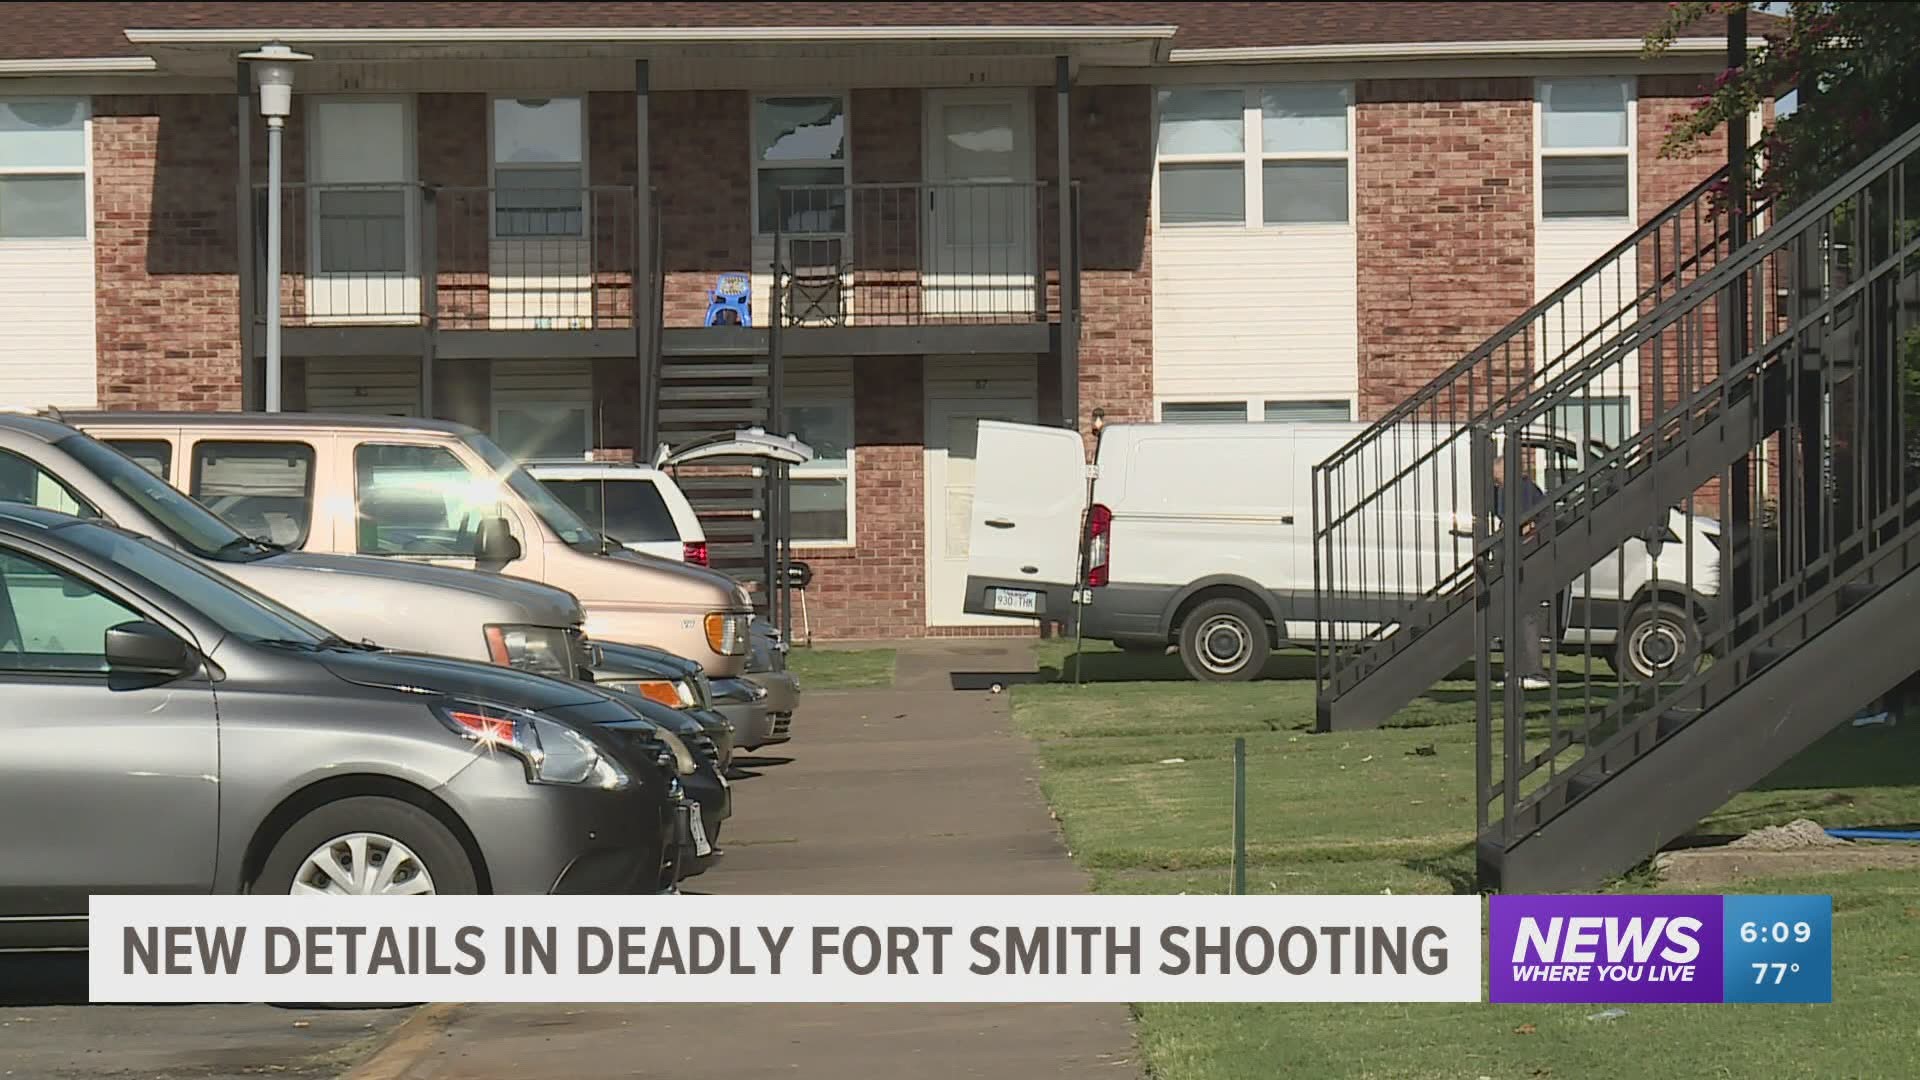 New details in deadly Fort Smith shooting